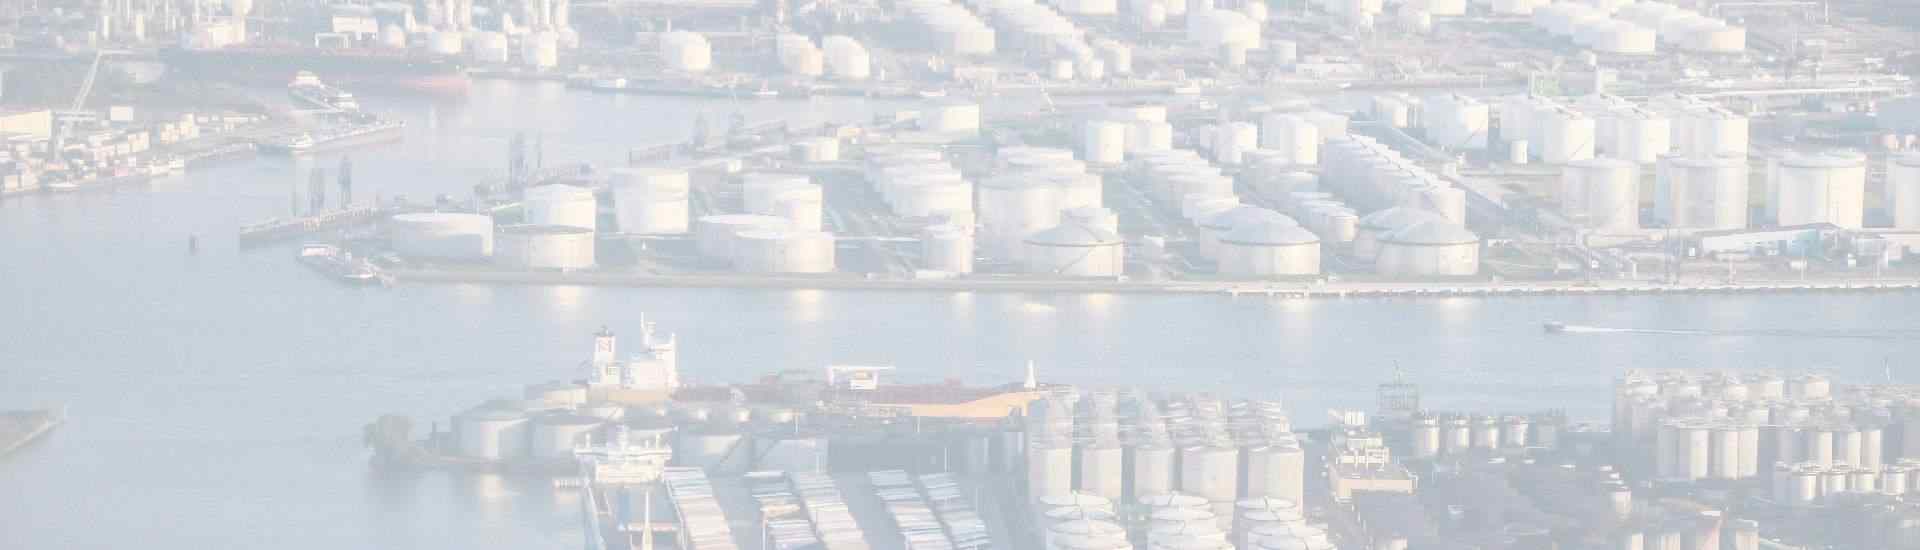 Oil and chemical terminals Rotterdam